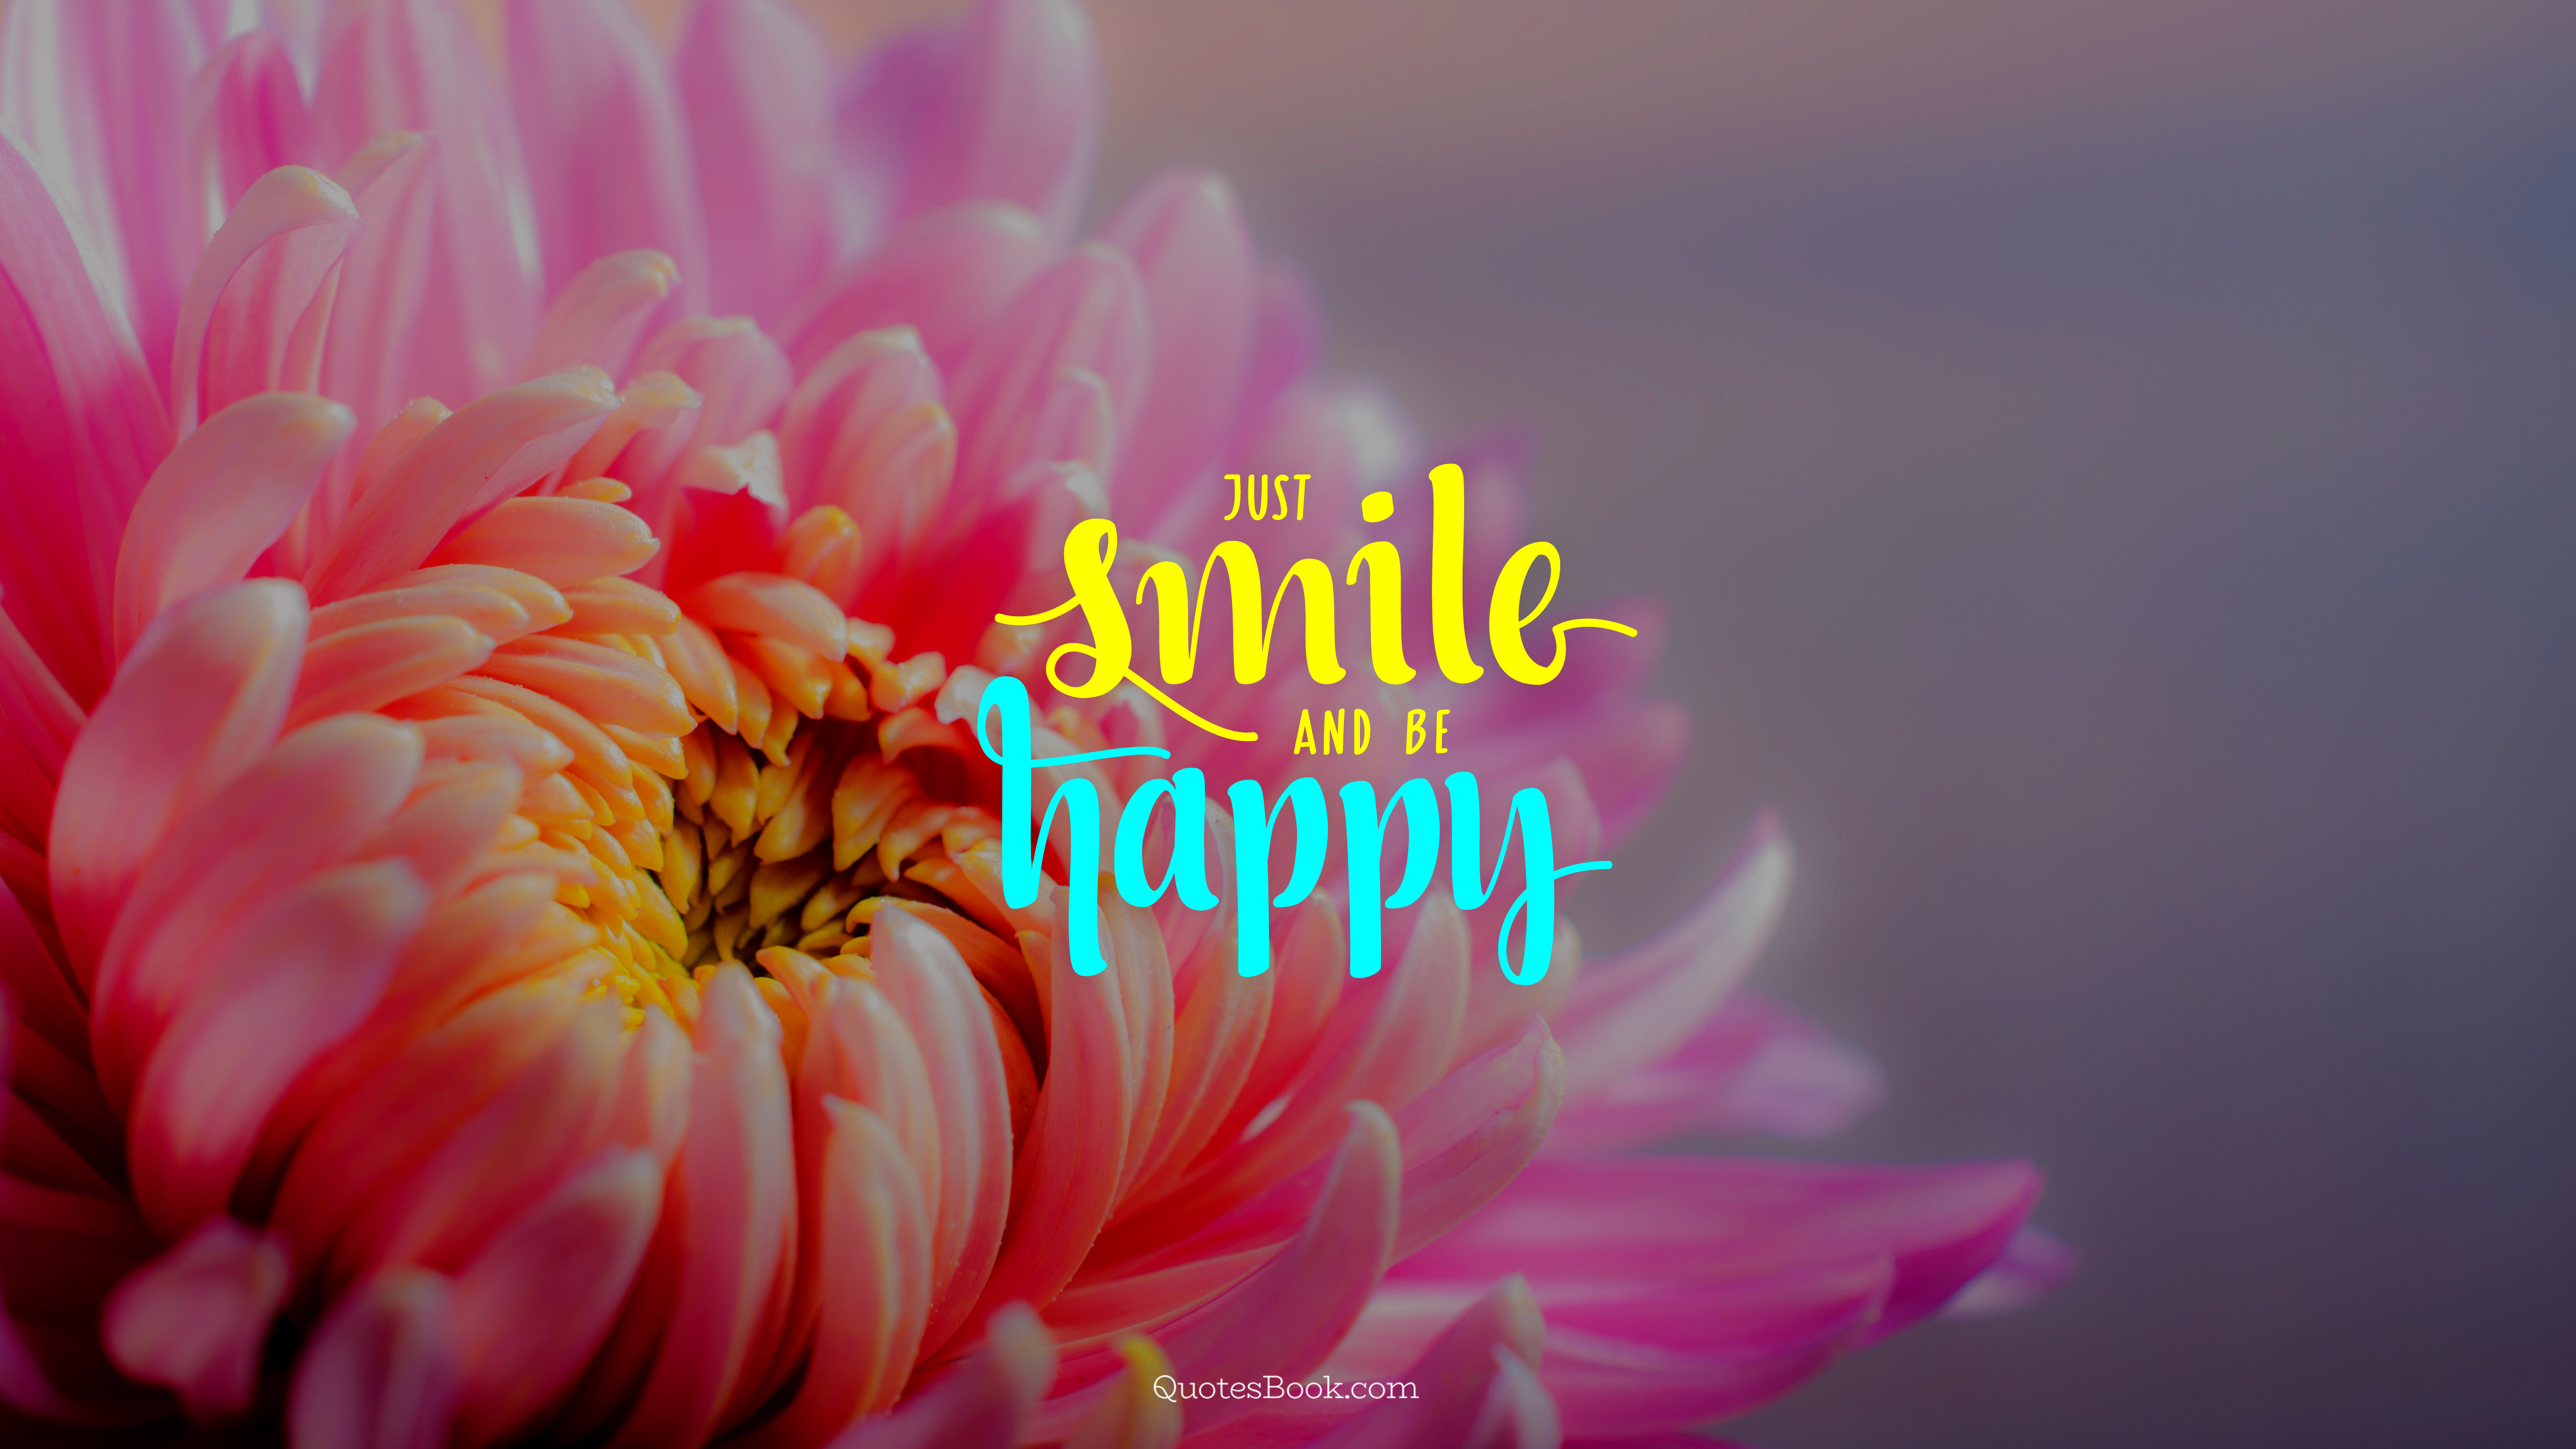 Just smile and be happy QuotesBook